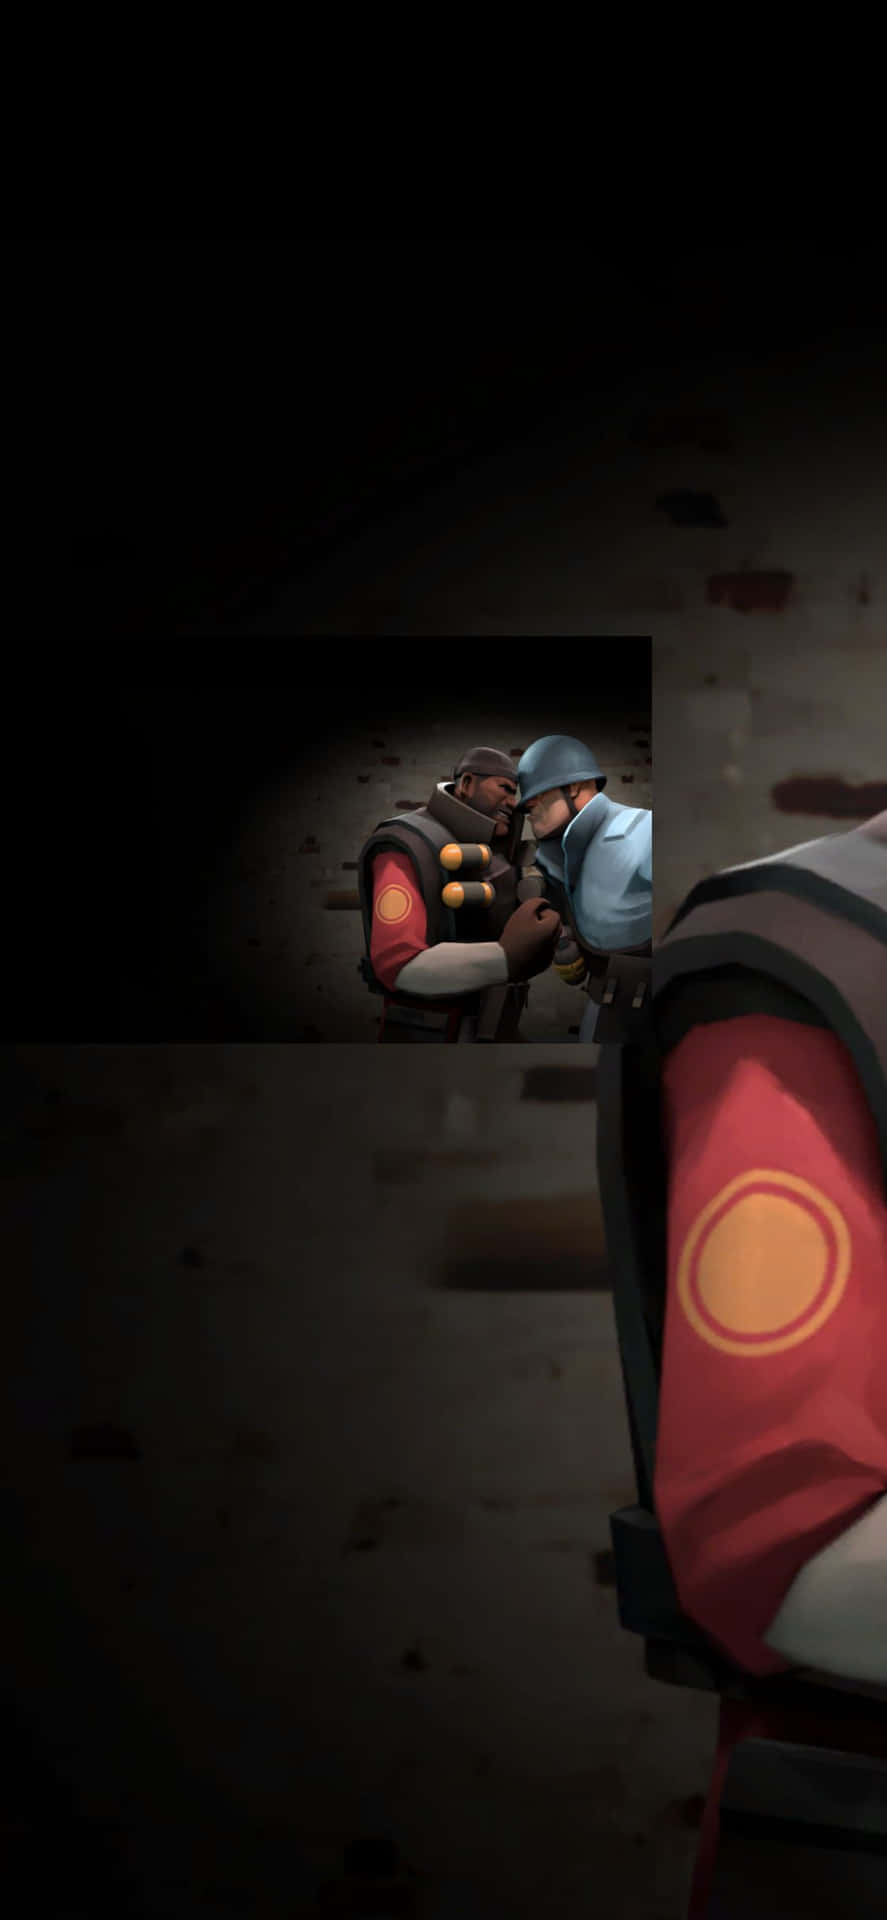 Play Team Fortress 2 on iPhone Xs